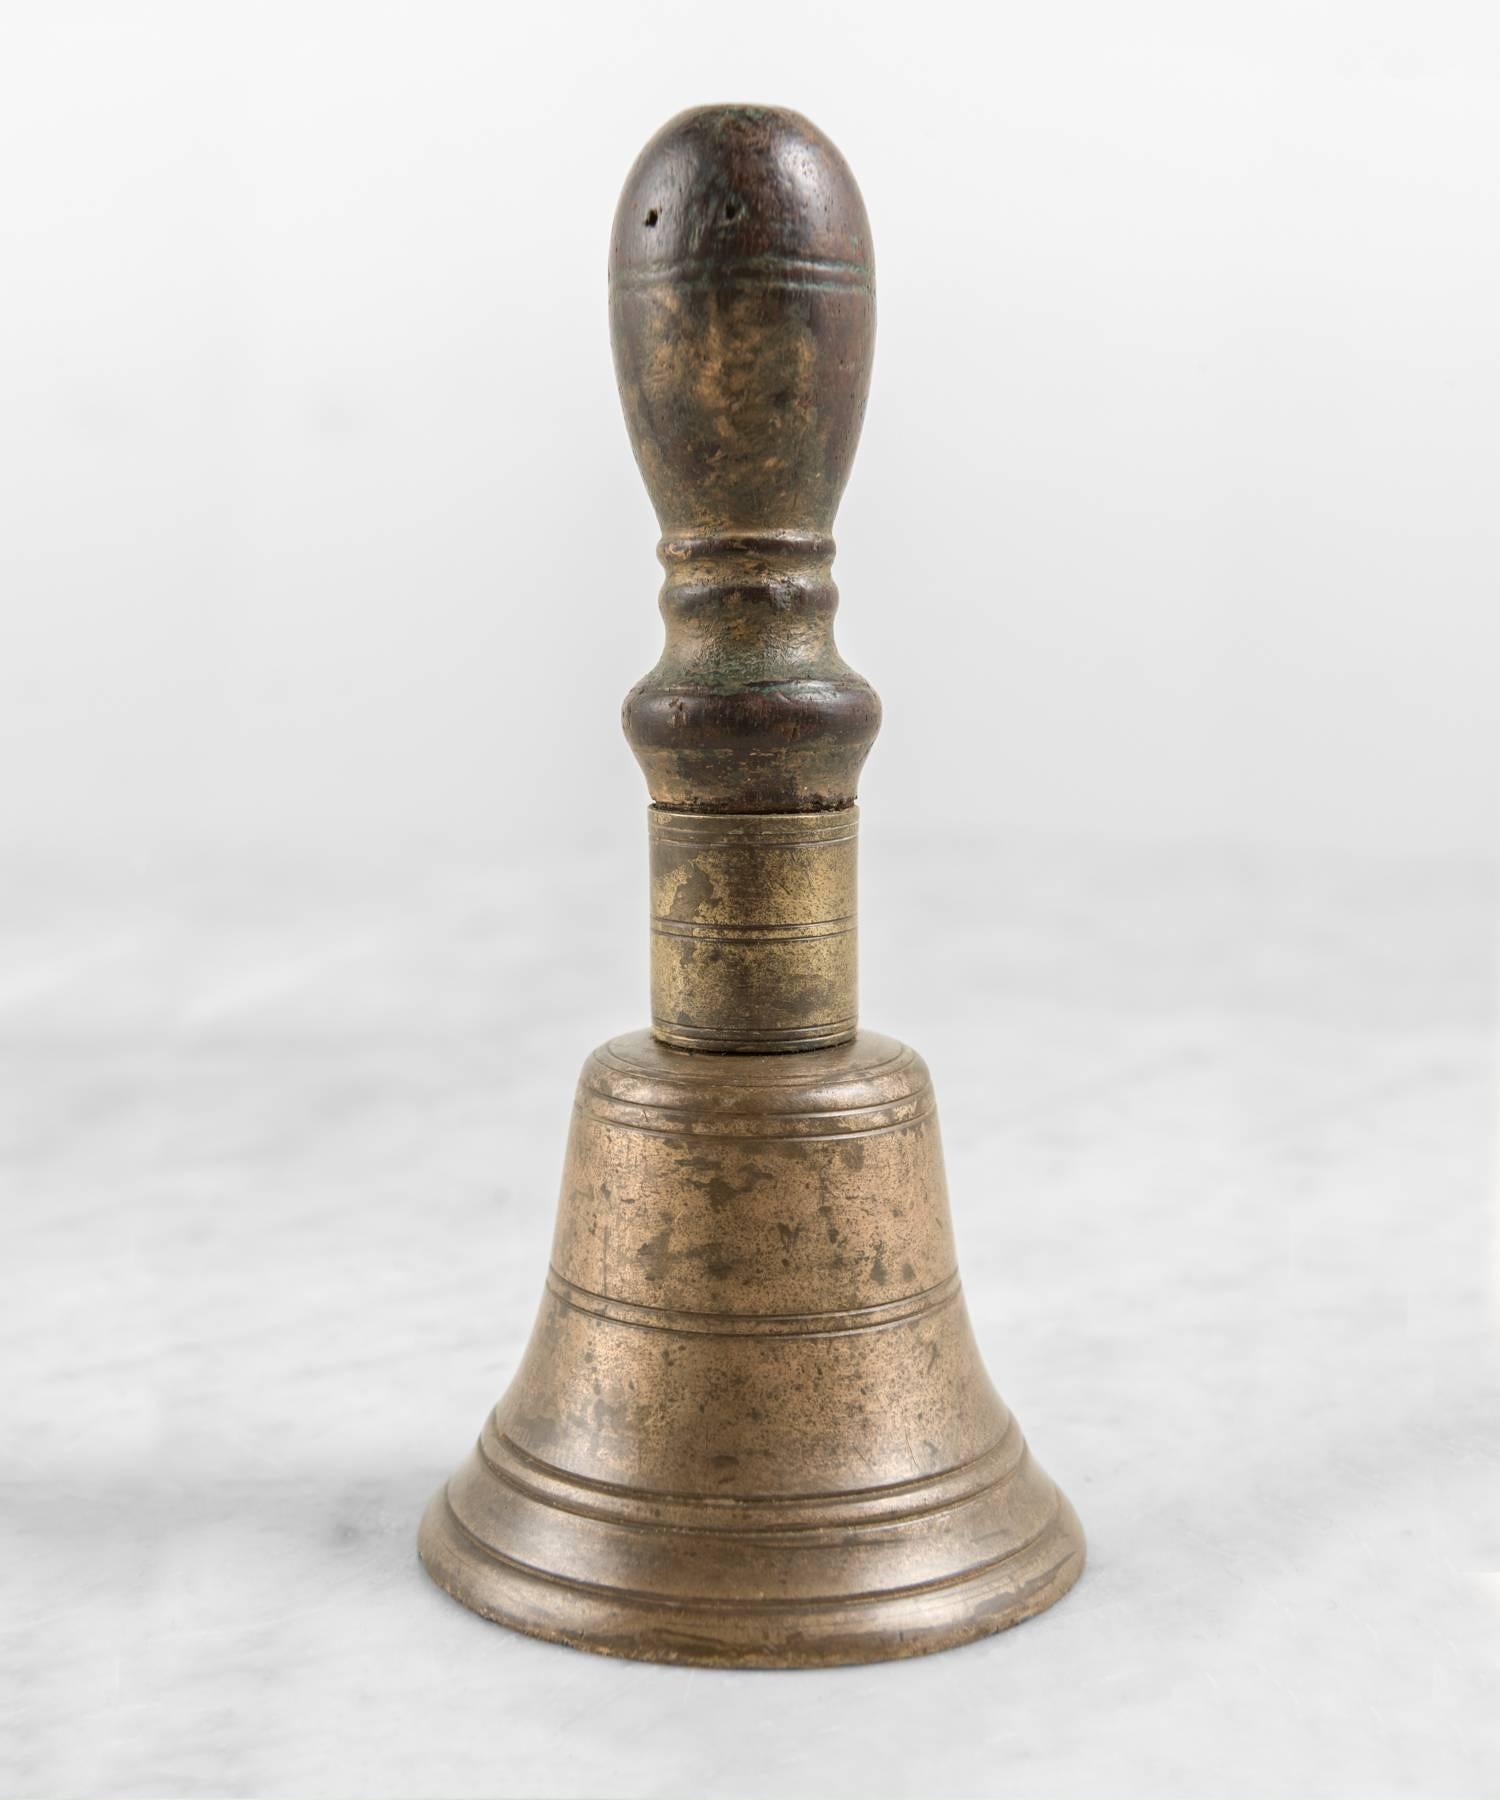 American Small Sized Bell with Wooden Handle, circa 1900-1940